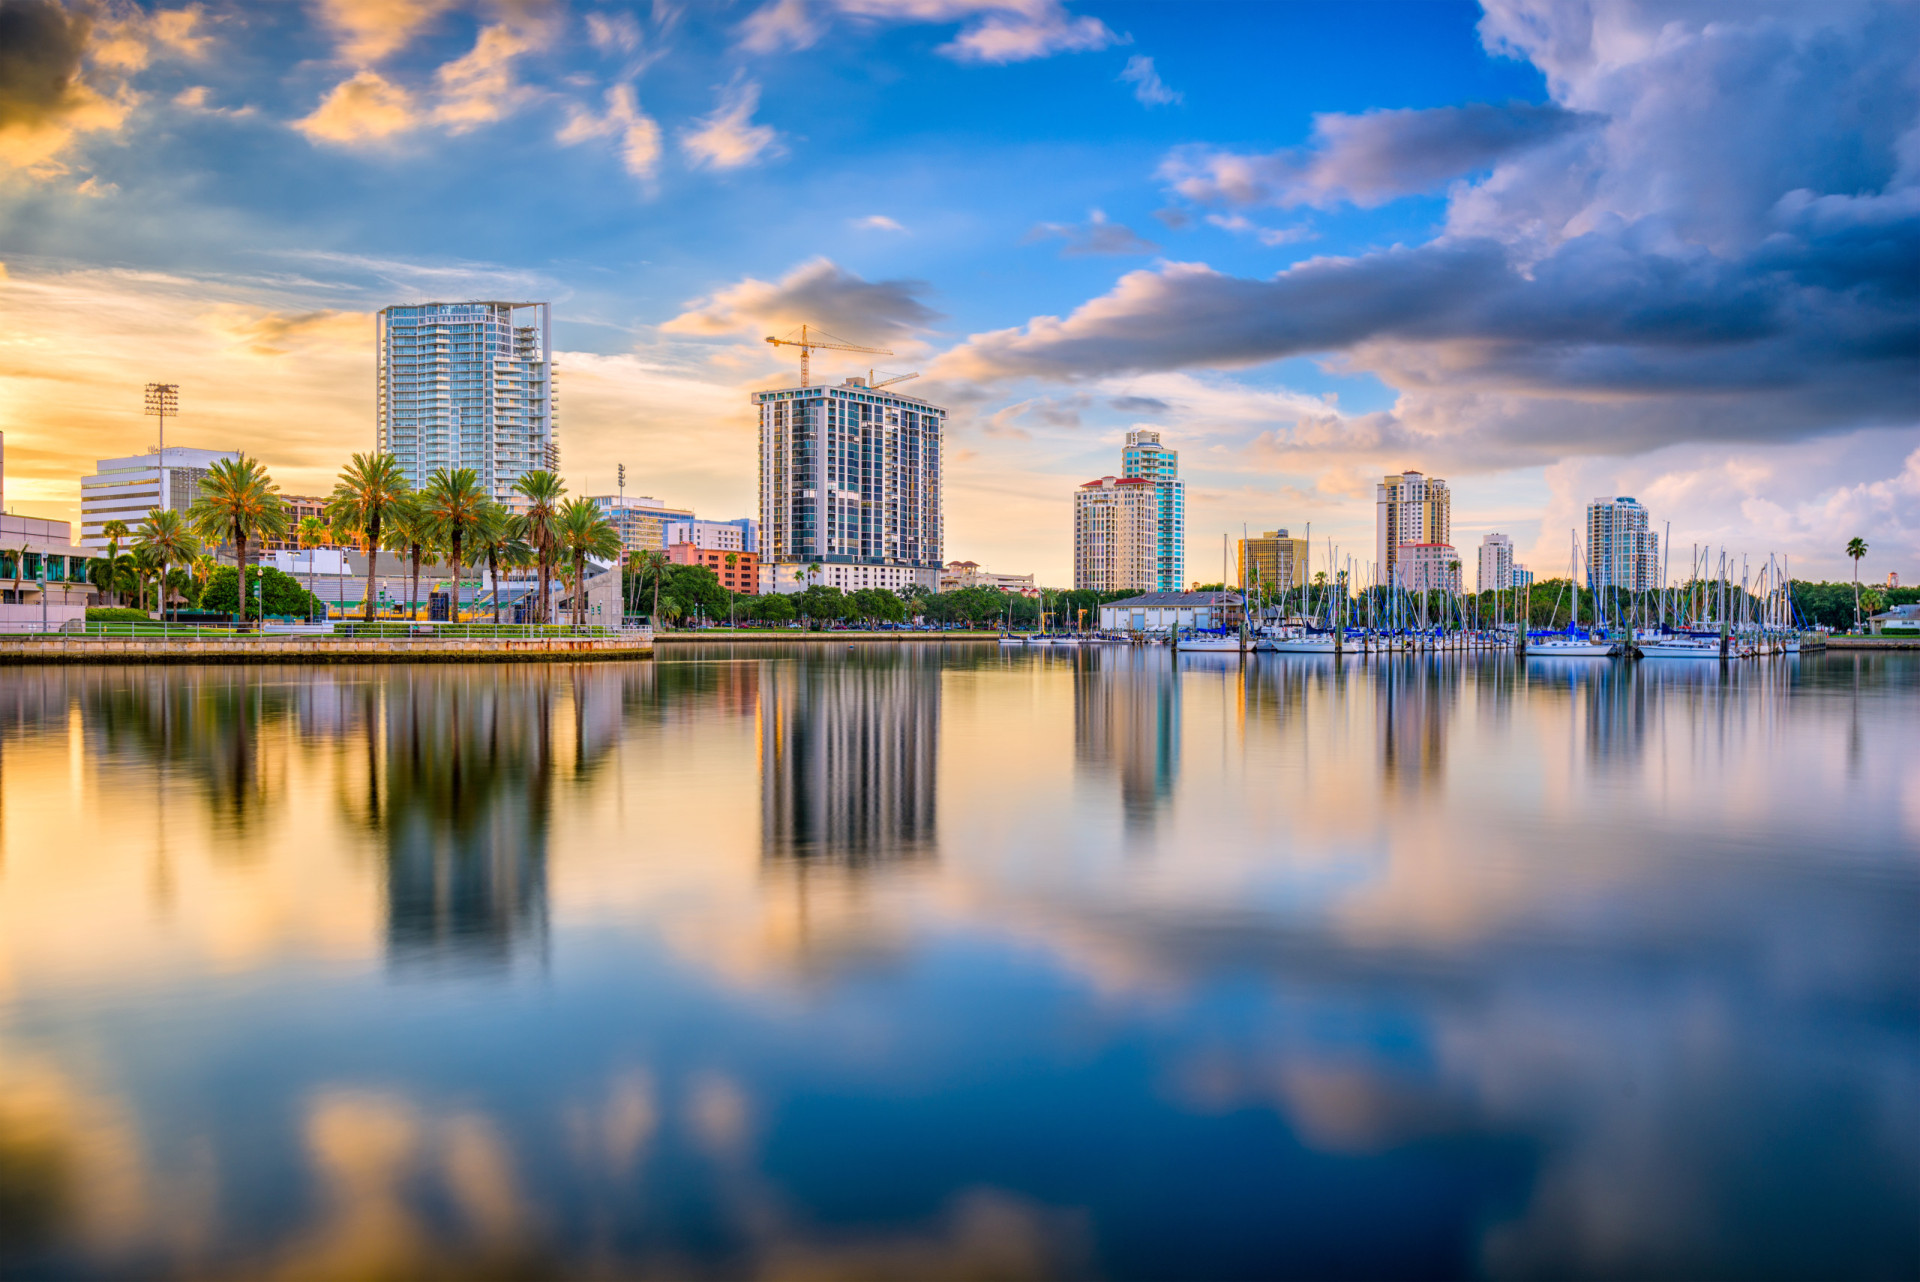 <p>With a rent index of 57.0, St. Petersburg is a gem on Florida's gulf coast. Known for its sunny weather and arts scene, it's a smaller city with a big appeal and equally big living costs.</p><p>You may also like:<a href="https://www.starsinsider.com/n/194952?utm_source=msn.com&utm_medium=display&utm_campaign=referral_description&utm_content=651794en-in"> You won't believe these celebrity couples met on blind dates</a></p>